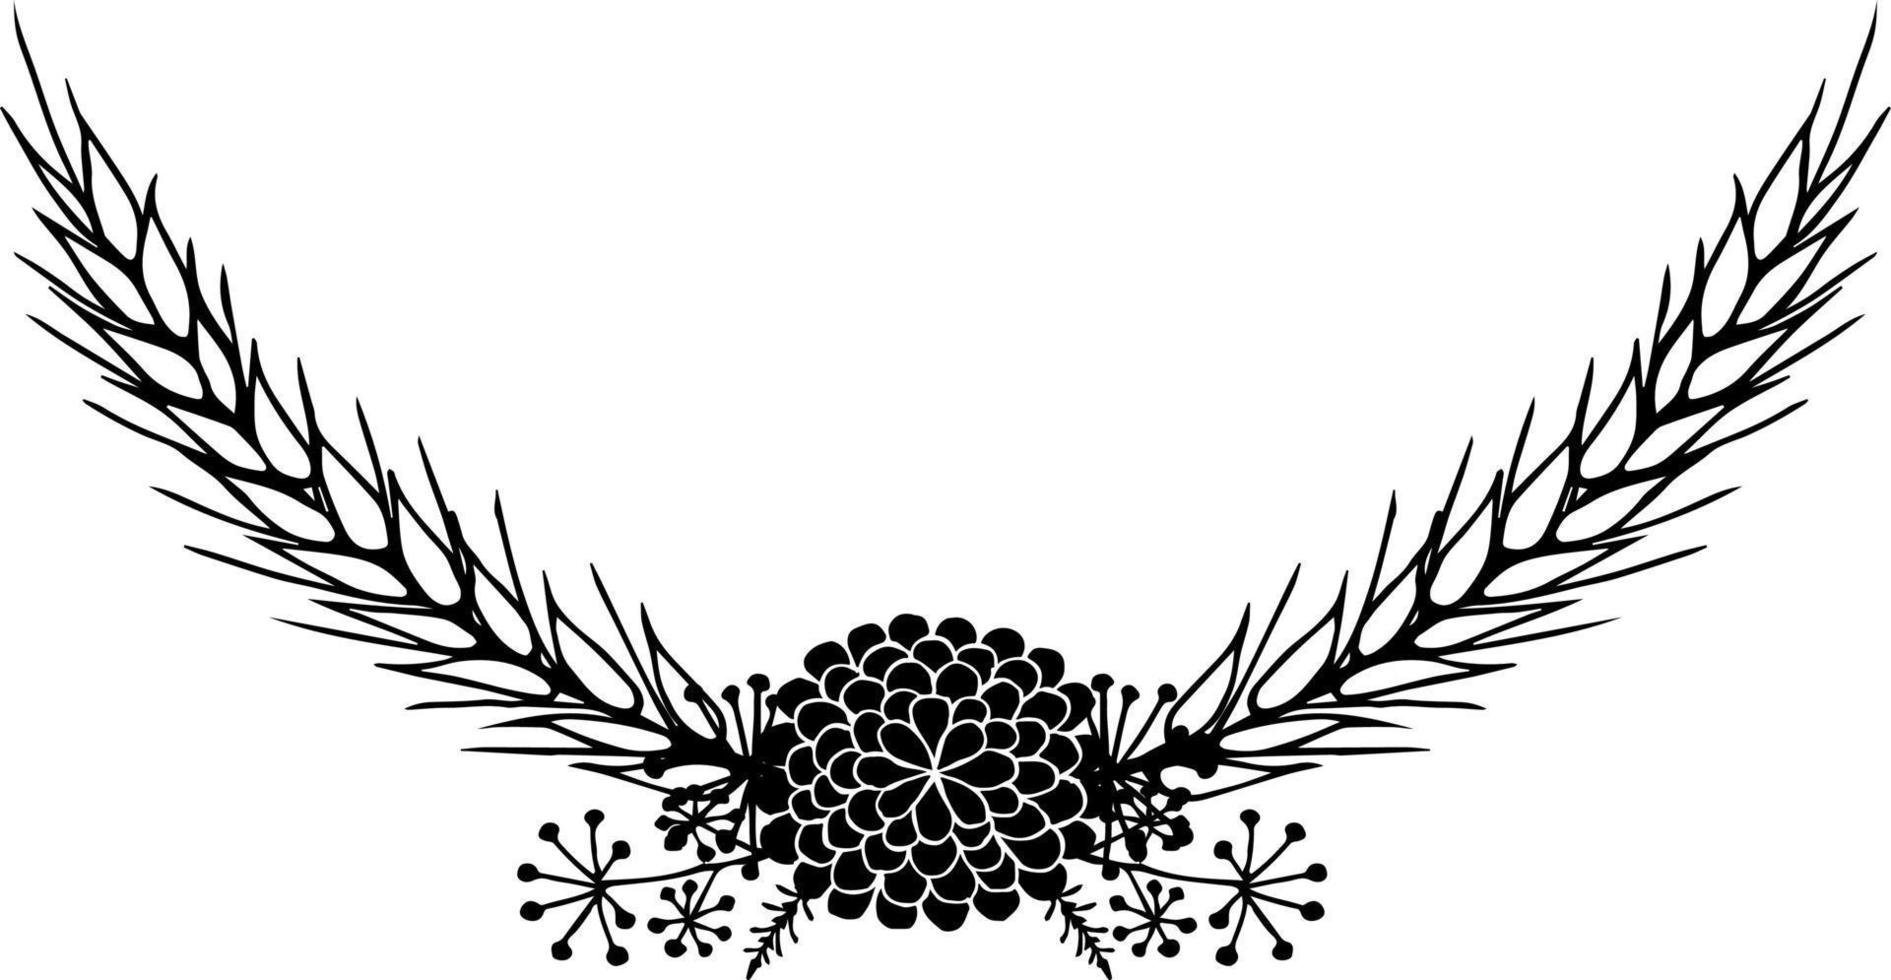 vector illustration of a floral ornament in black and white colors